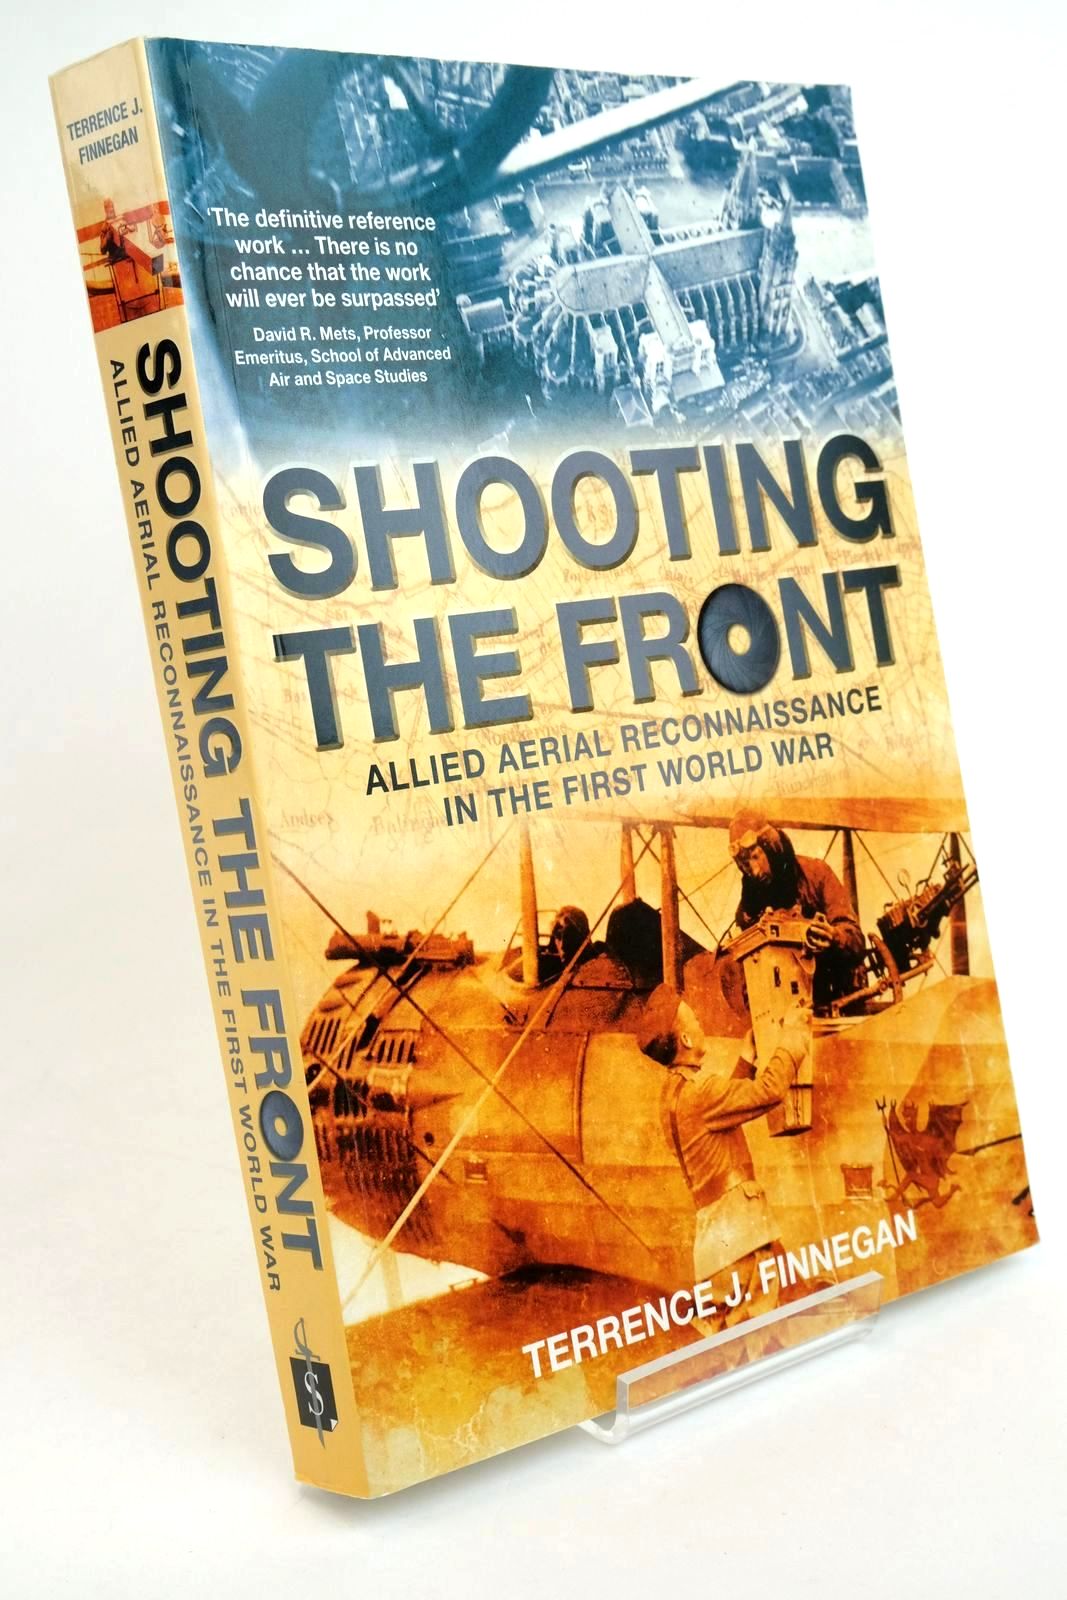 Photo of SHOOTING THE FRONT ALLIED AERIAL RECONNAISSANCE IN THE FIRST WORLD WAR written by Finnegan, Terrence J. published by Spellmount Publishers (STOCK CODE: 1322313)  for sale by Stella & Rose's Books